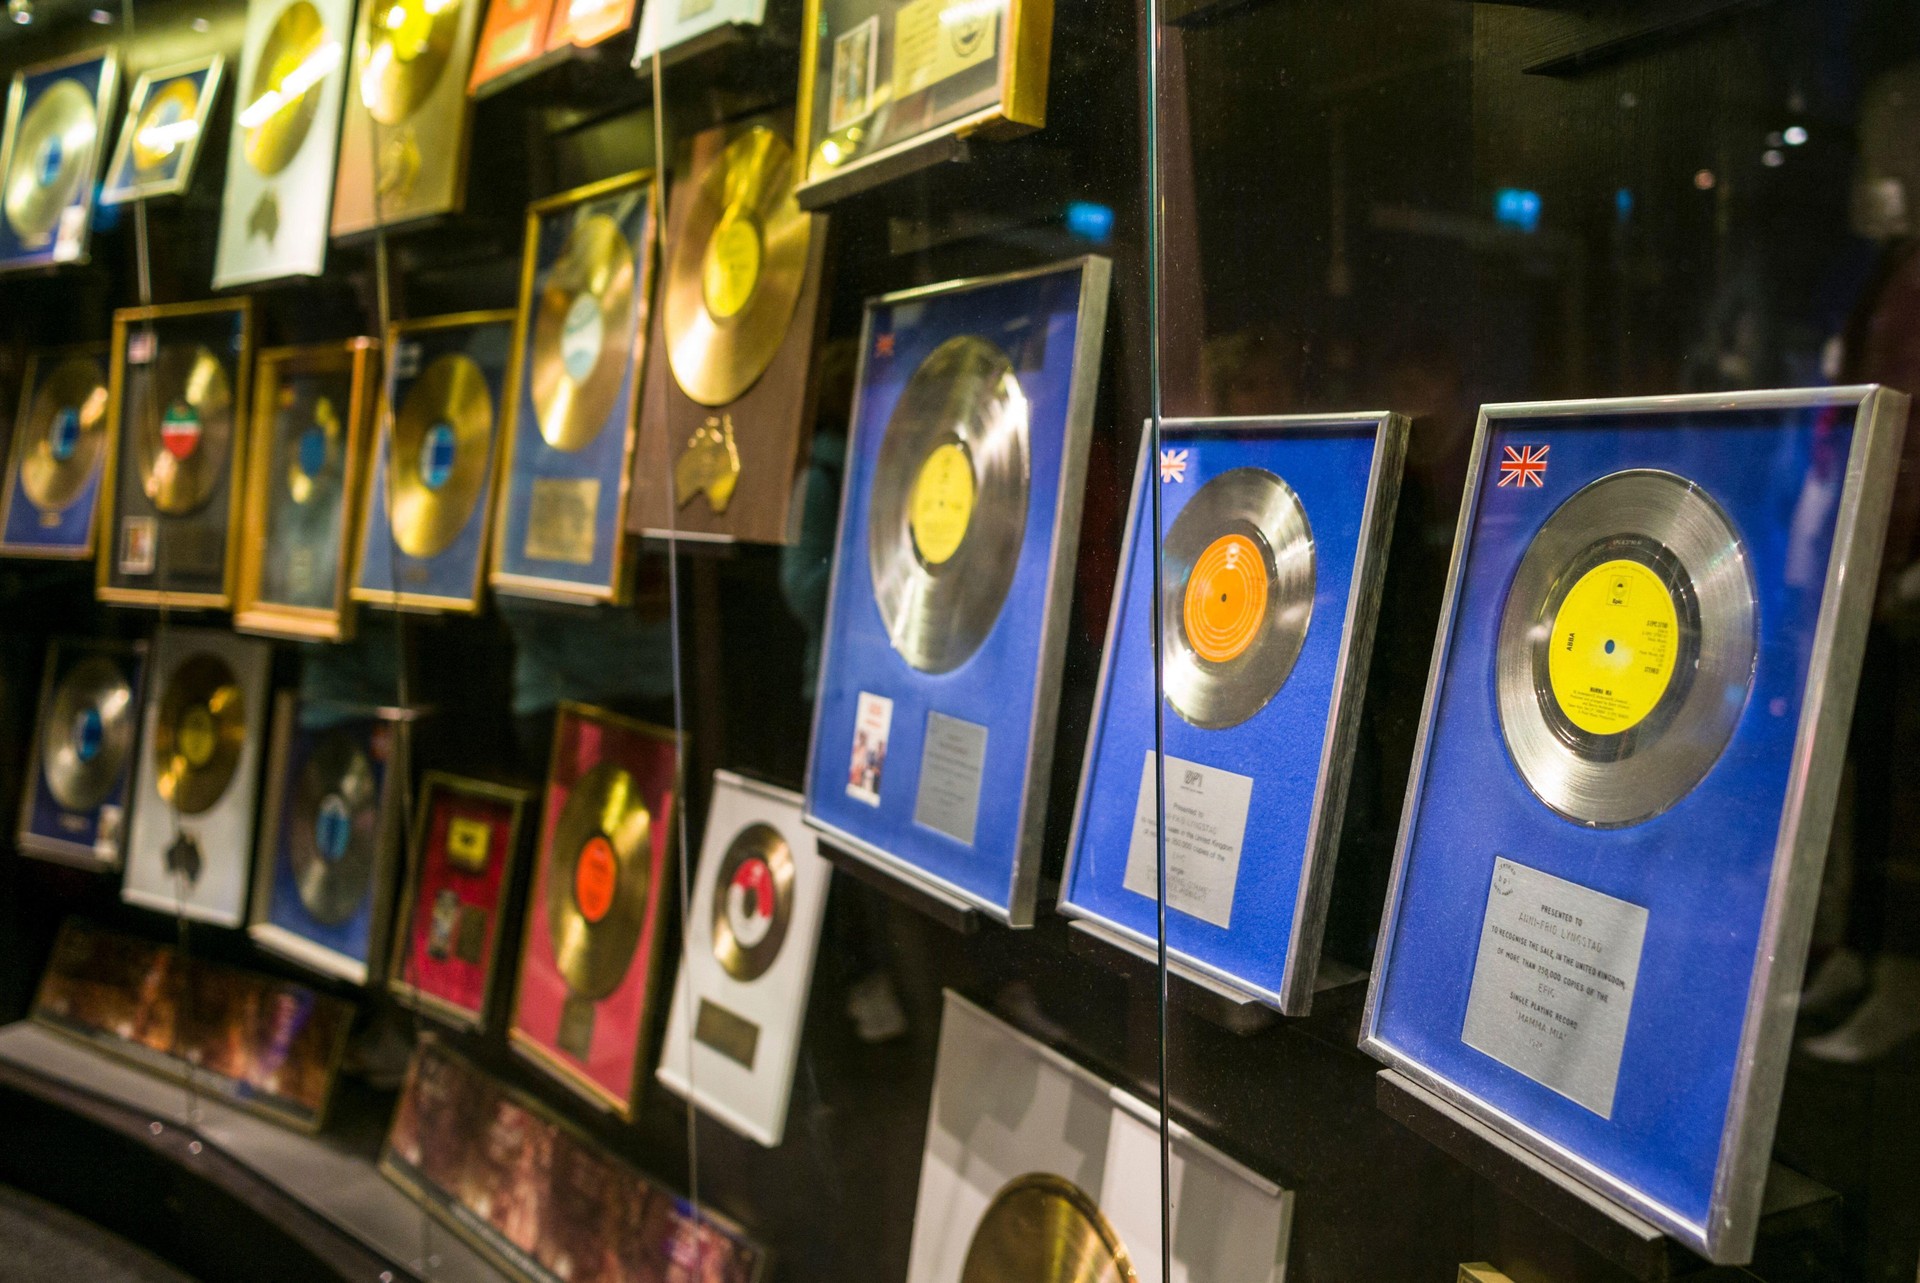 Disques d’or d’ABBA